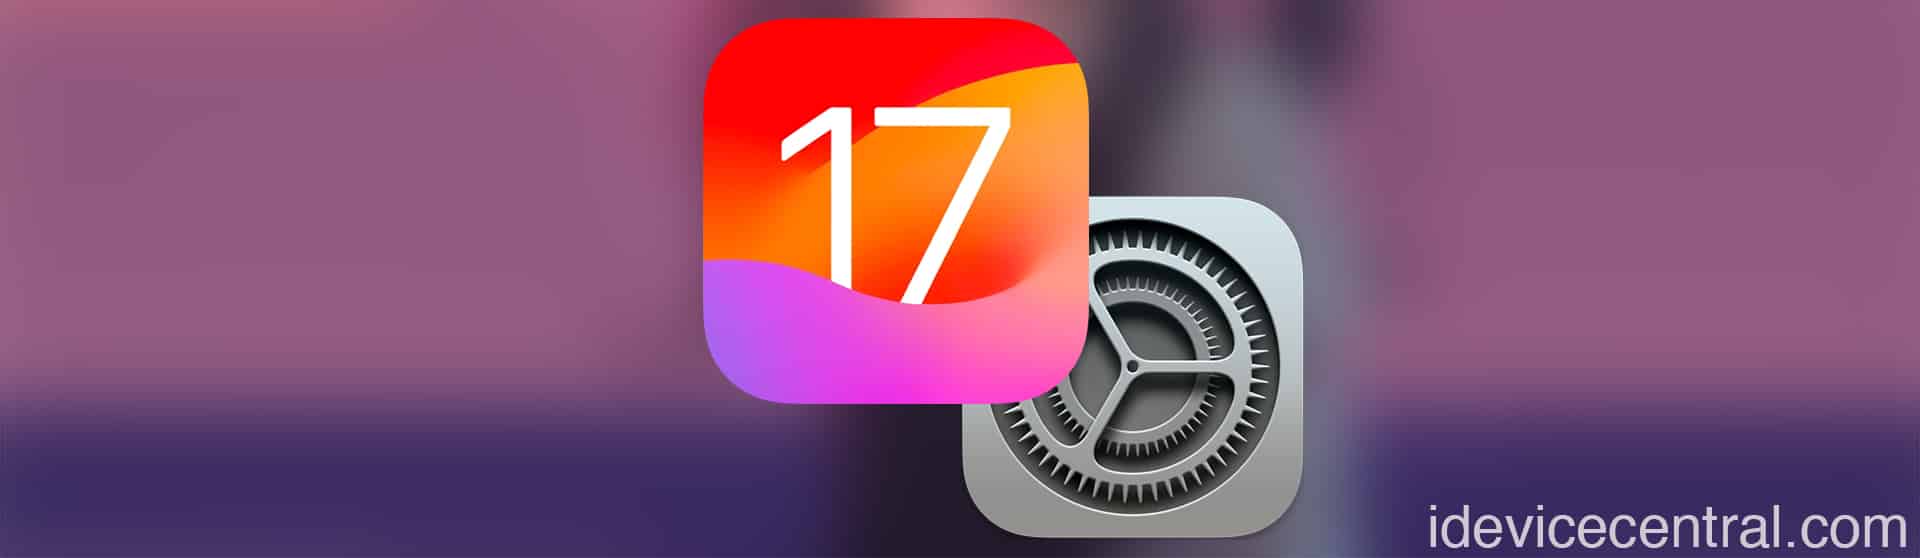 5 Important iOS 17 SETTINGS You Should Change Immediately!